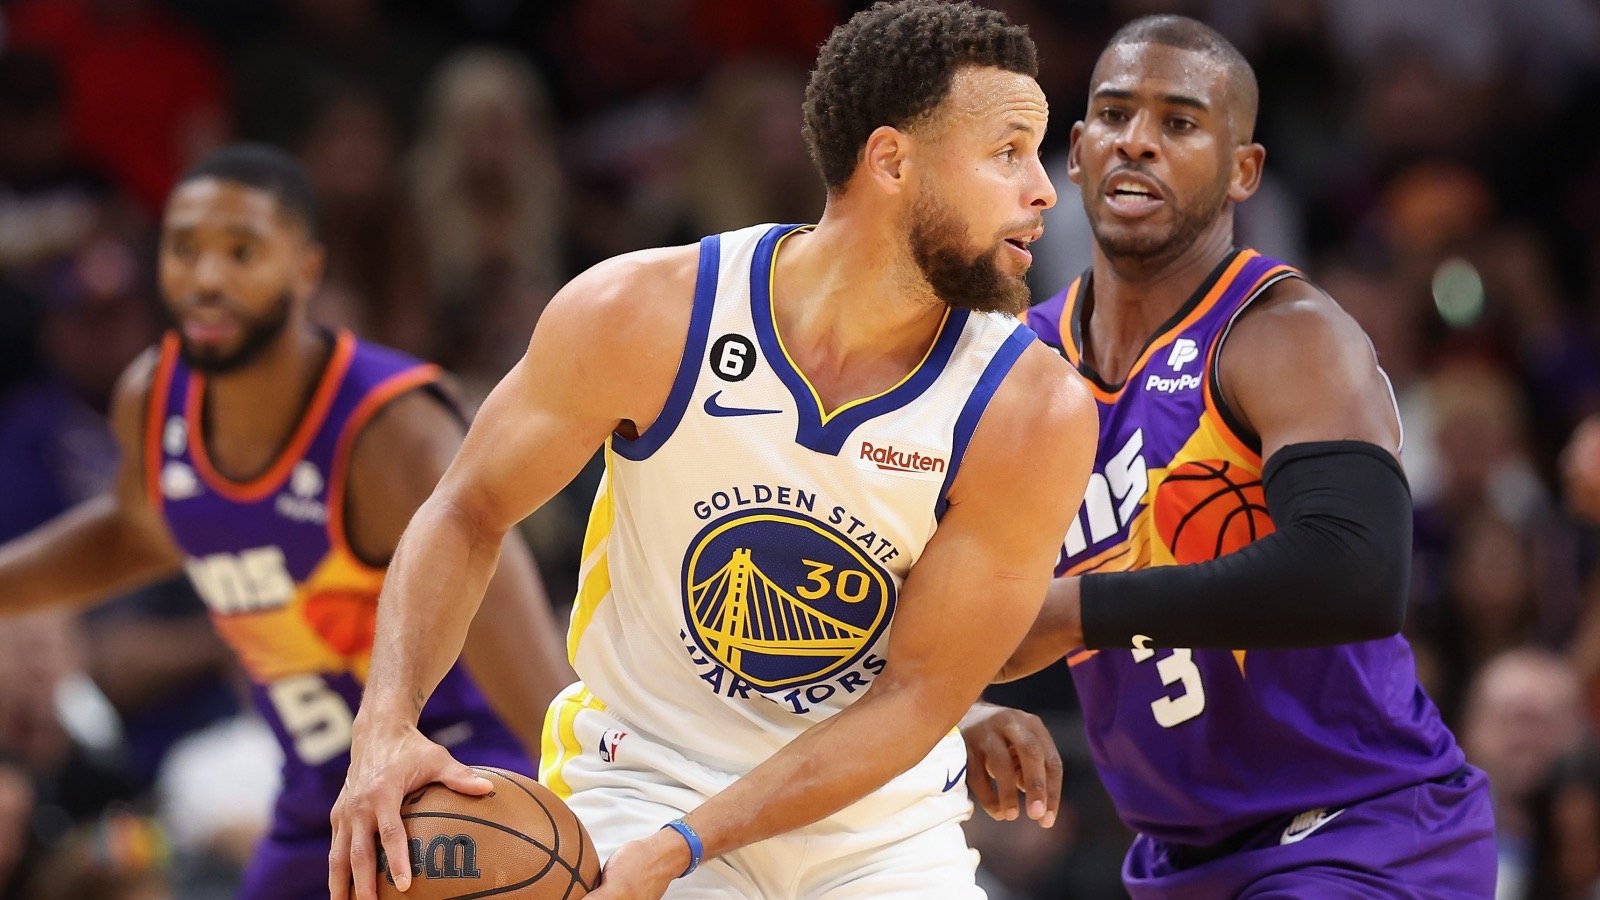 Chris Paul says he "feels sorry” for teams who have to play the Warriors